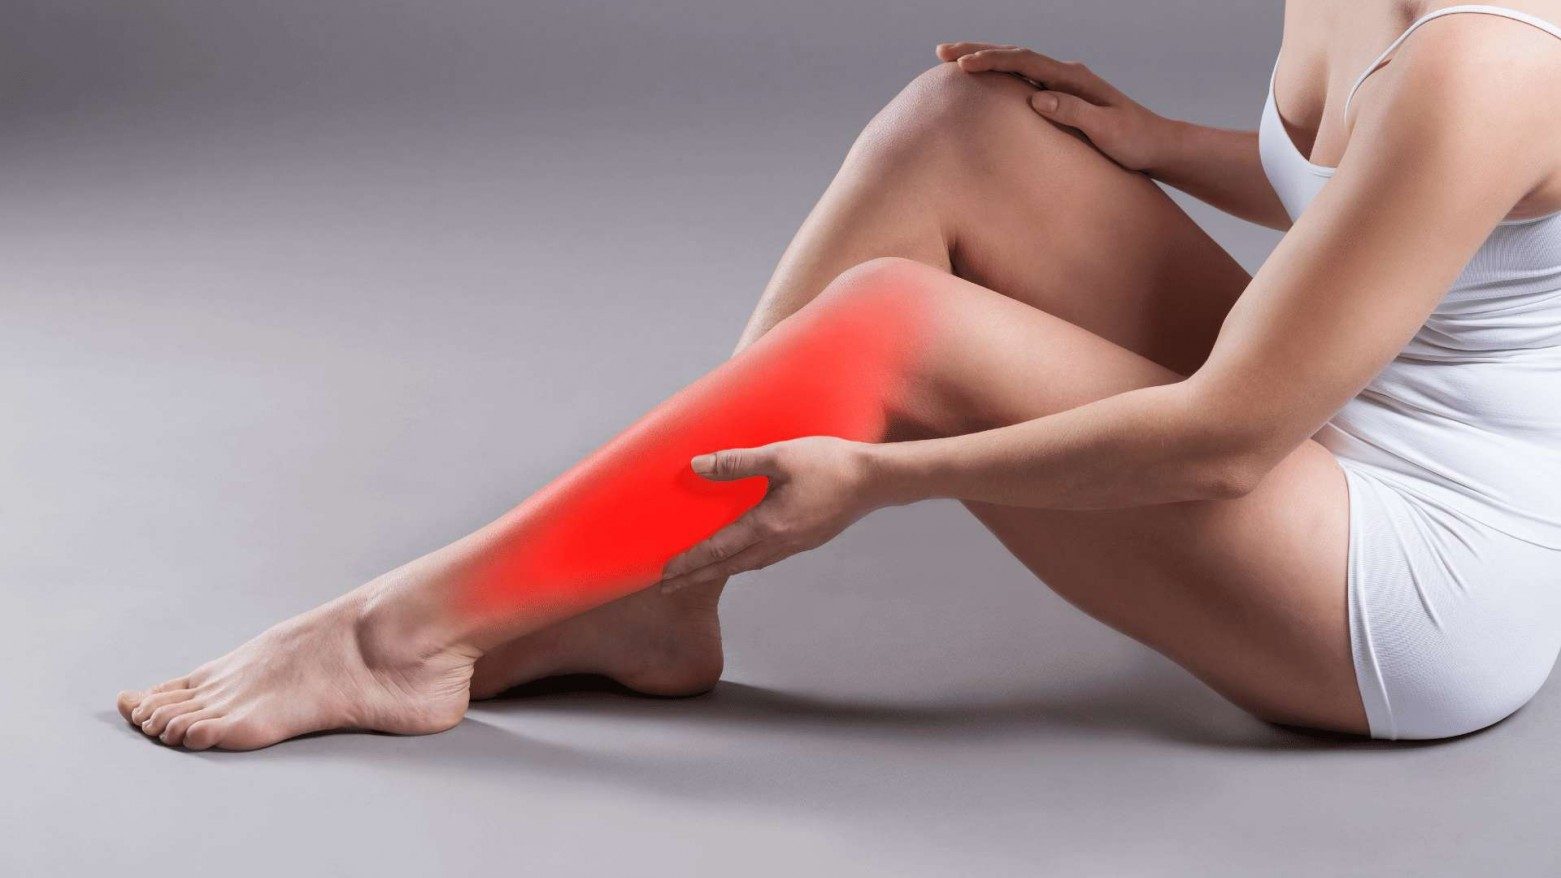 A side view of a woman in white sitting on the floor and touching her lower leg & shin. Her lower leg & shin is highlighted red signifying pain.